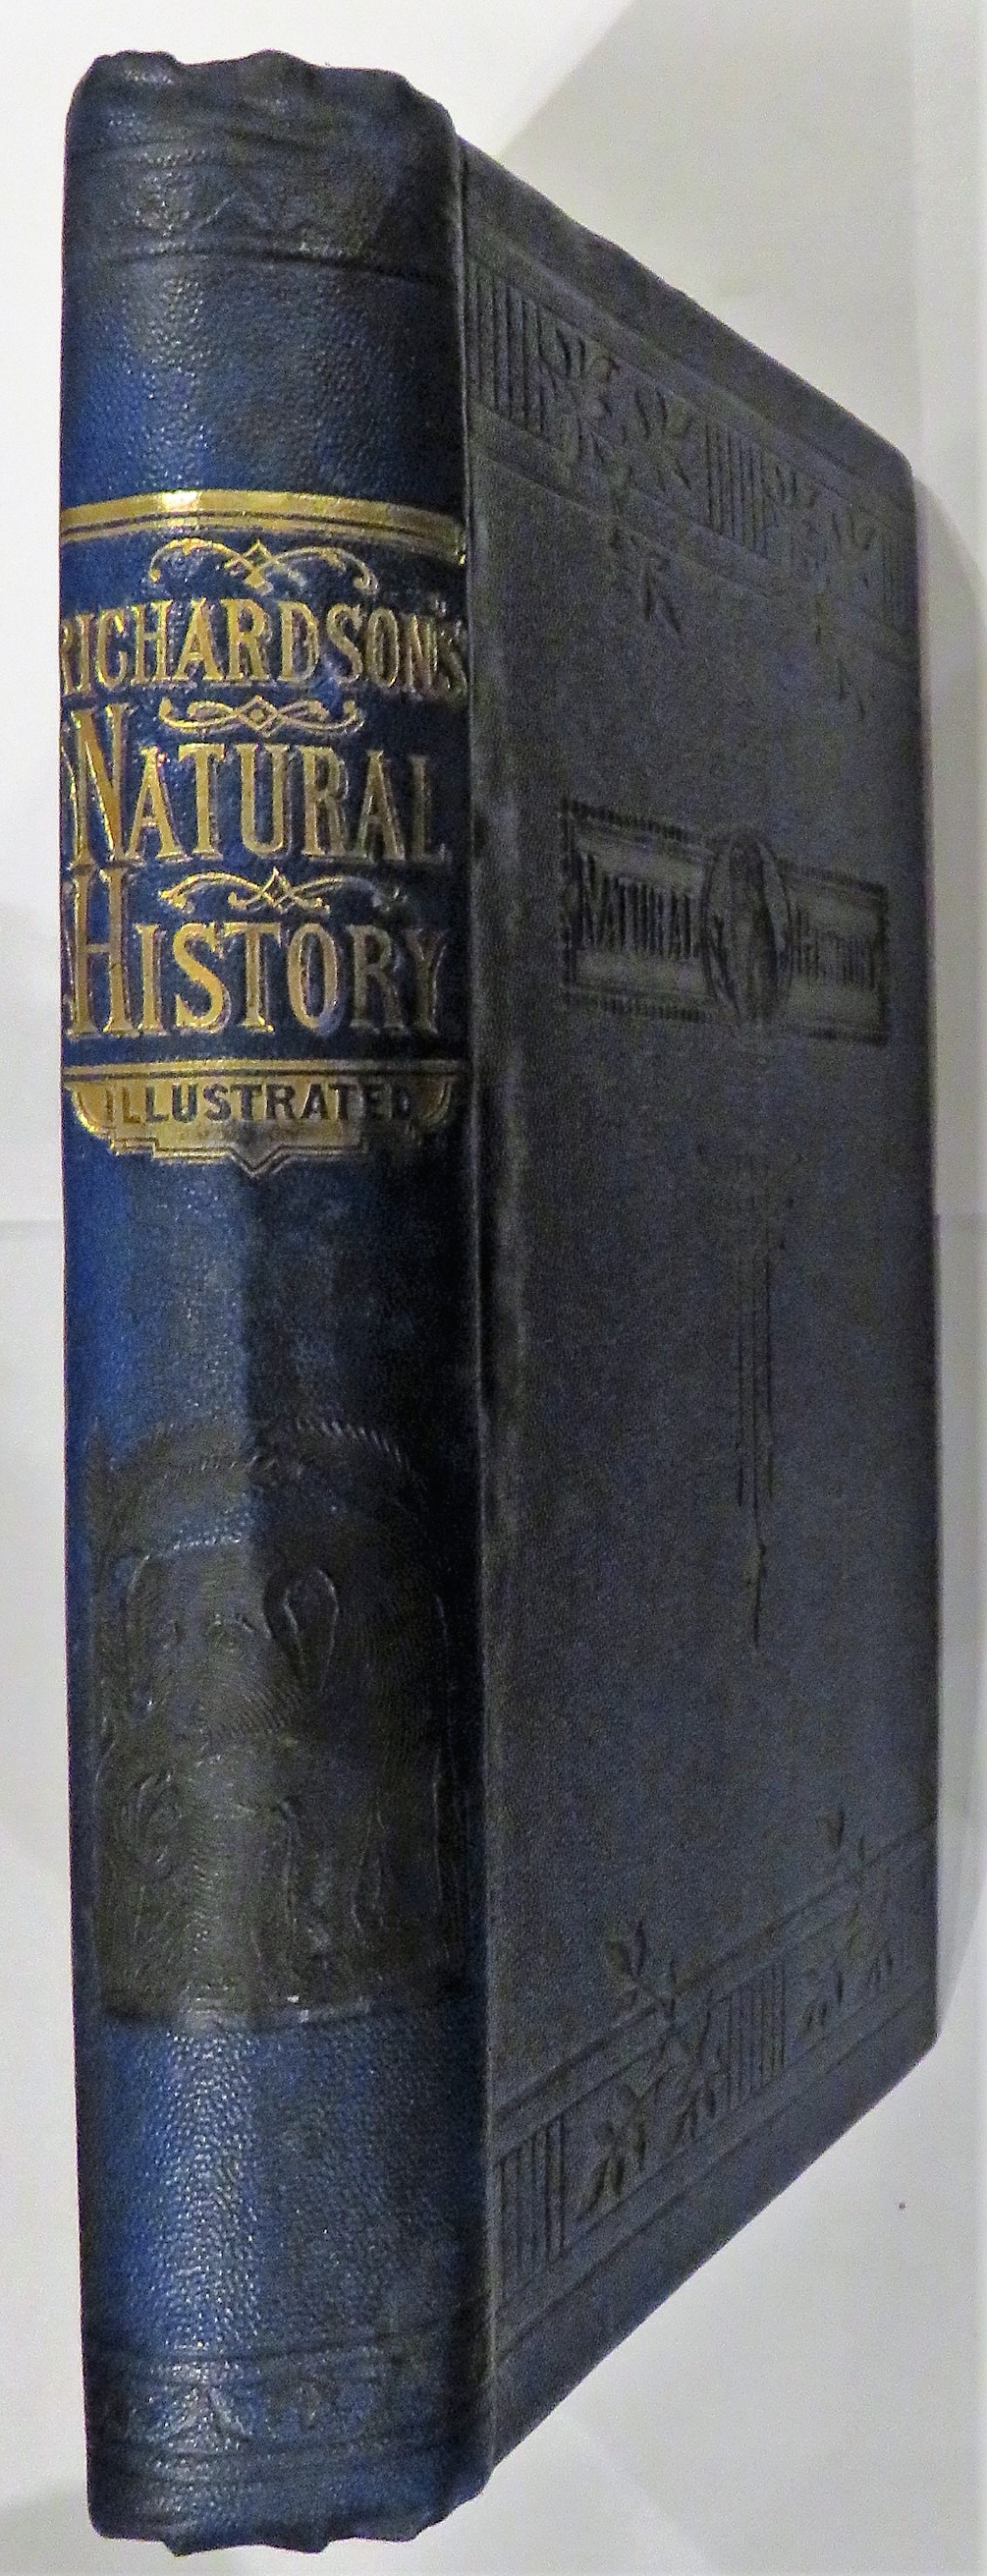 Richardson's Natural History; An Introduction To Animated Nature